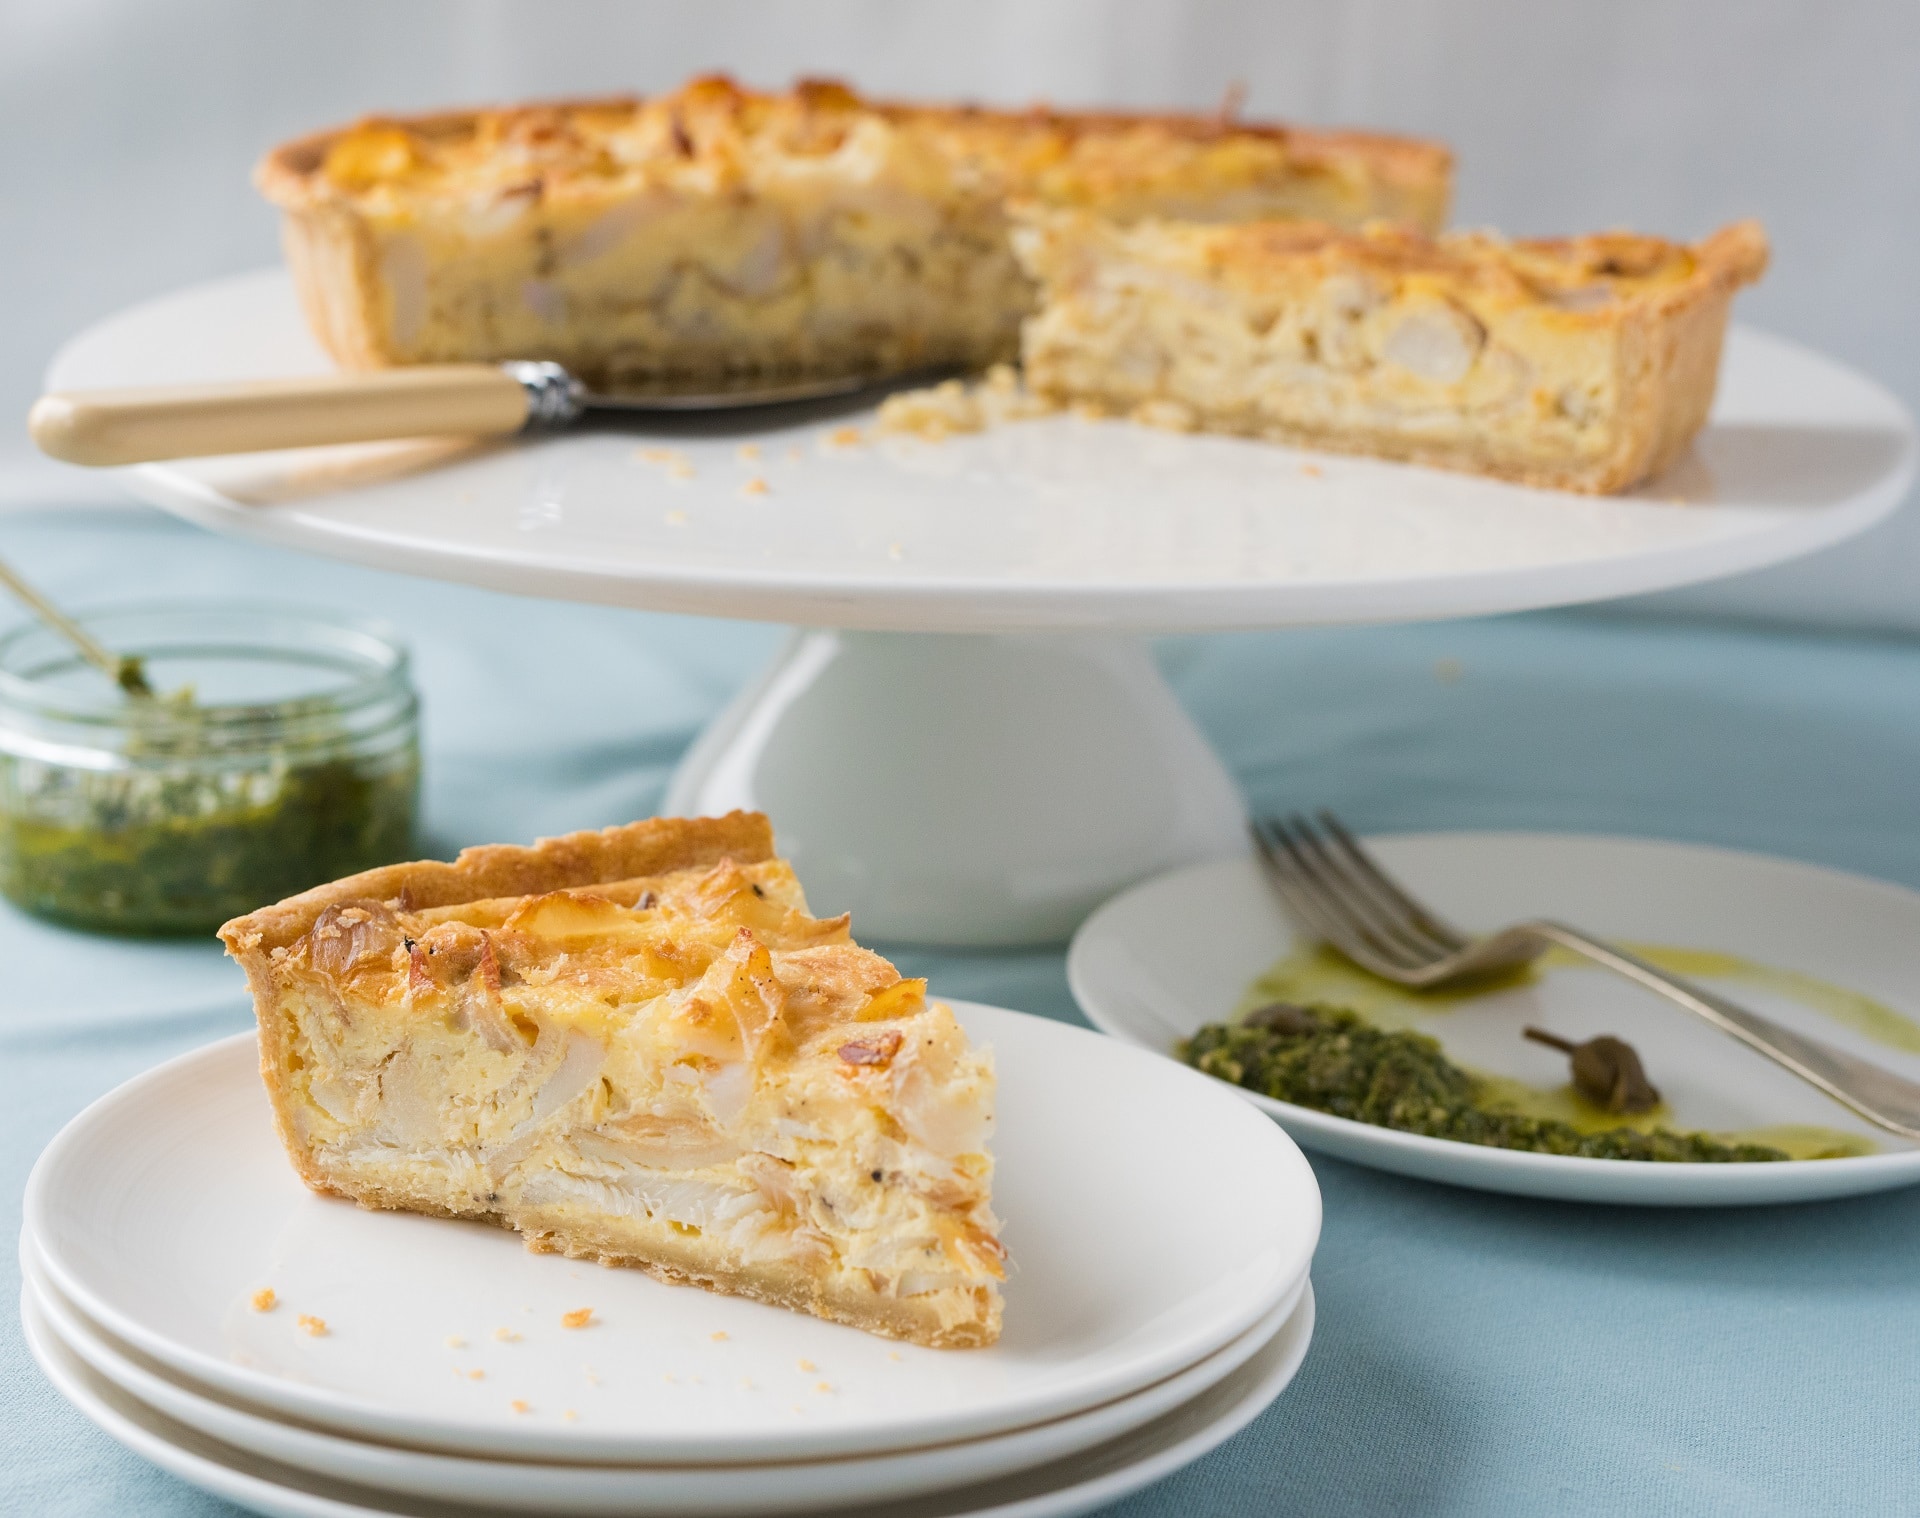 a deep filled quiche like tart with smoked haddock